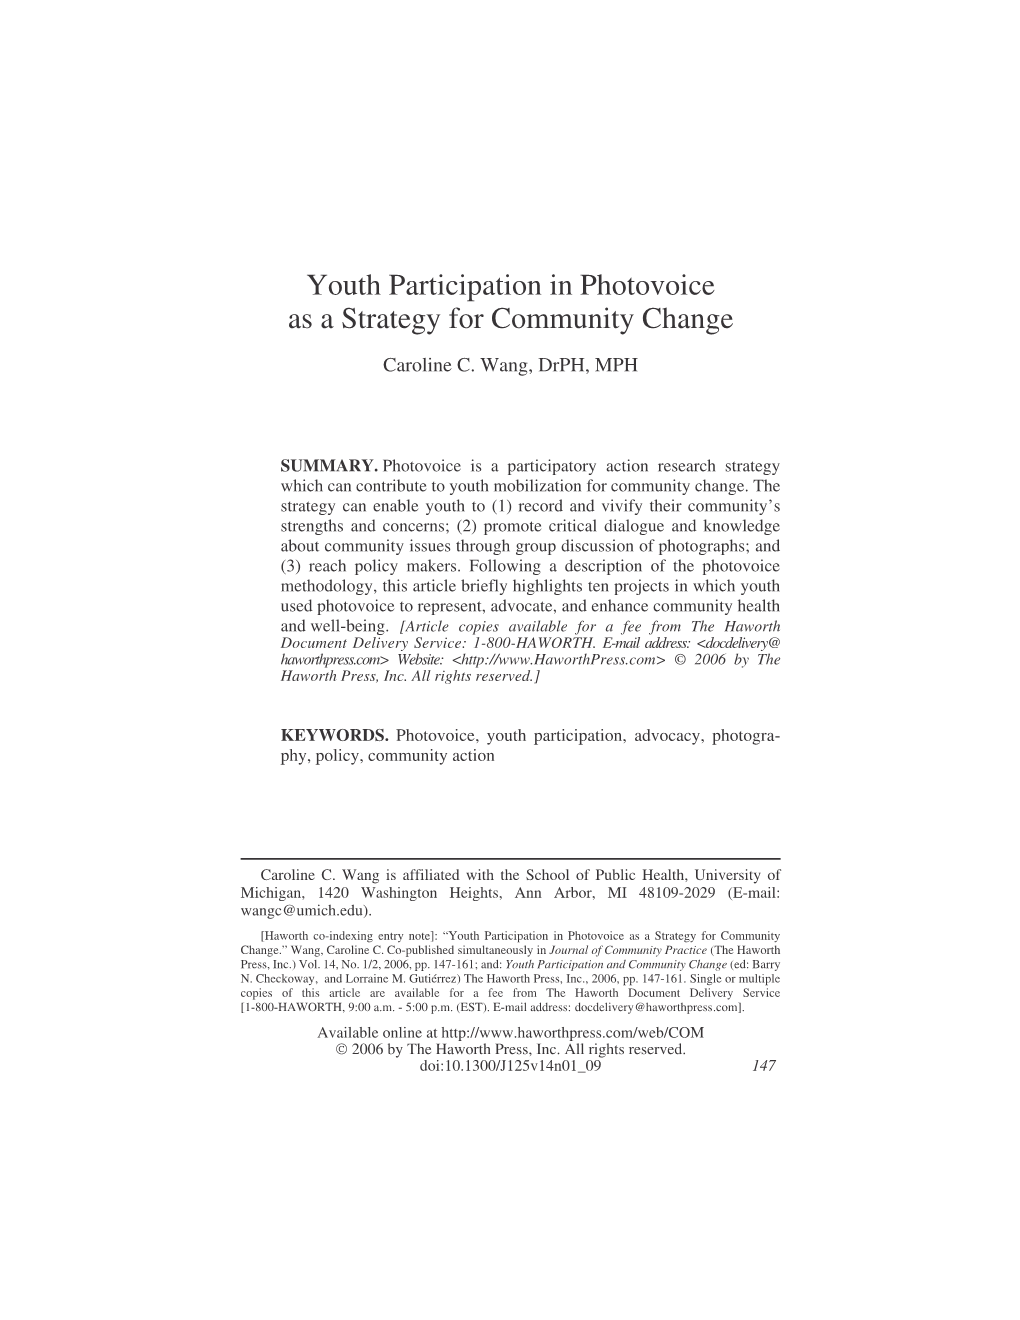 Youth Participation in Photovoice As a Strategy for Community Change